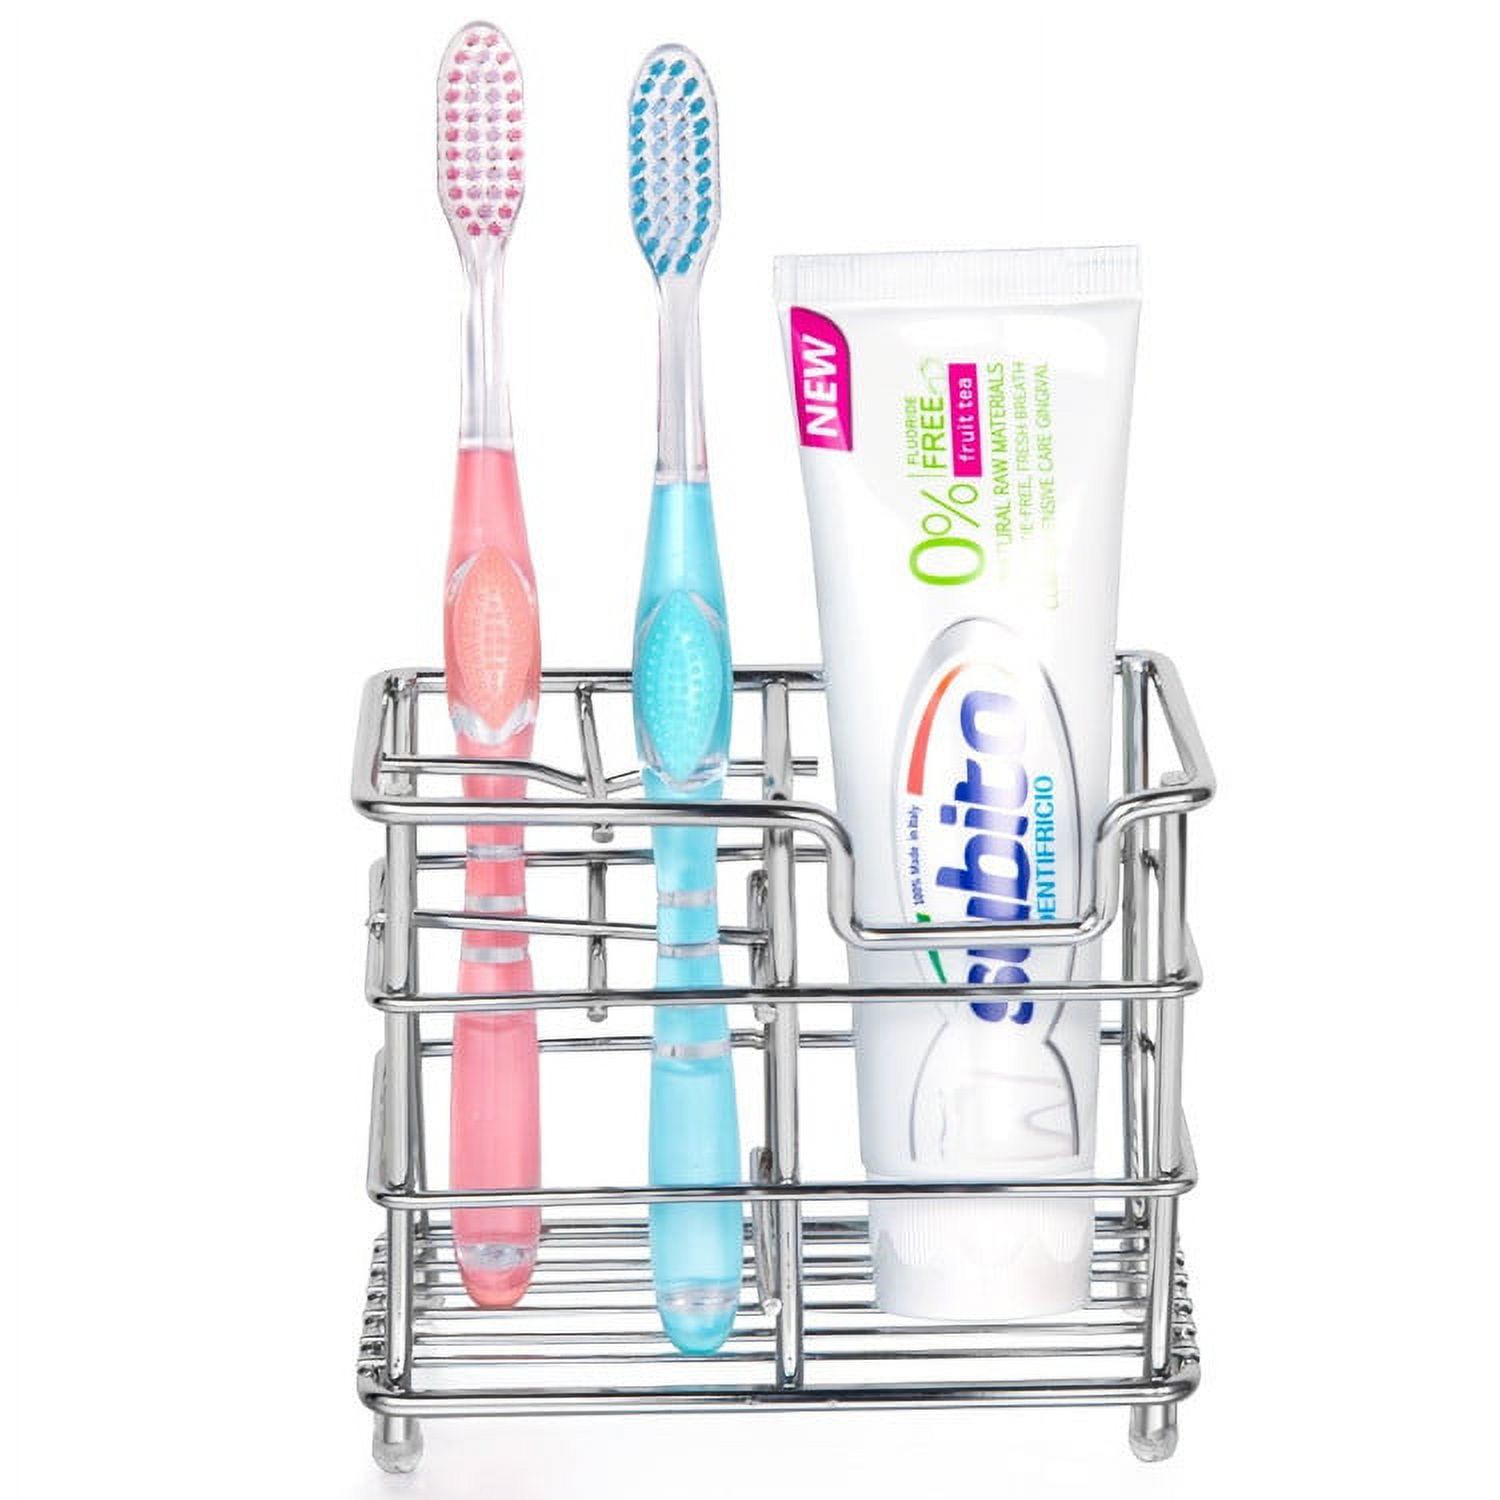 Toothbrush Holder Stainless Steel Multifunctional Tooth Brush Holder for Bathroom, Sturdy and Hygienic Toothpaste Holder - Sliver - image 3 of 5